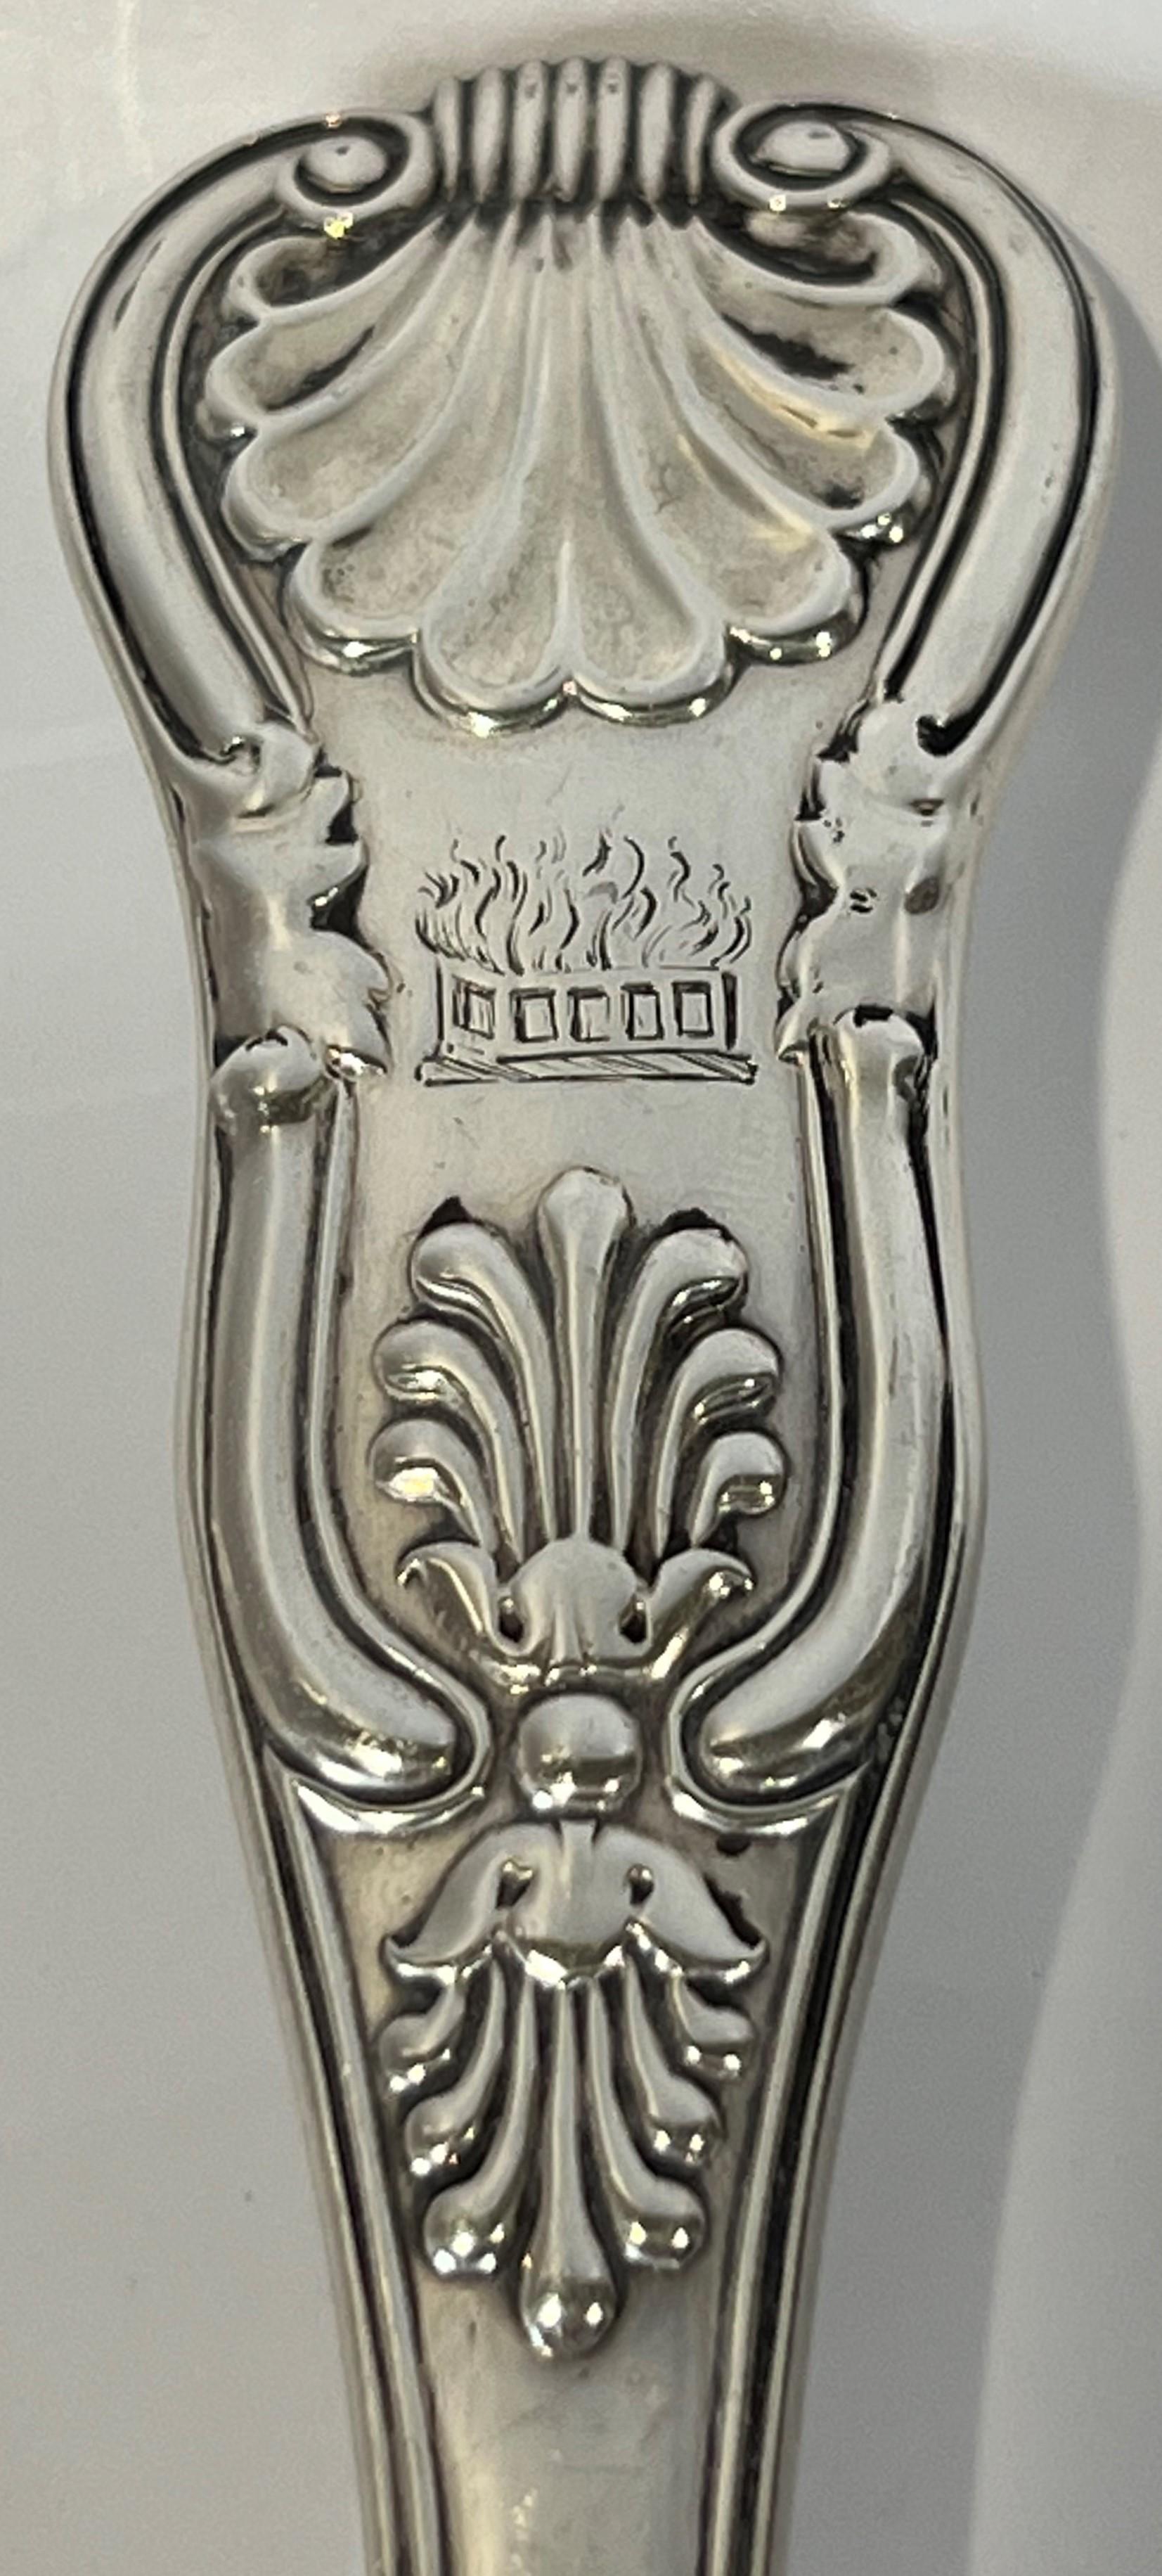 An extraordinary sterling silver fish server. William Bateman produced it in 1830 in London. The engraving of a burning building was unfamiliar and fascinating. After the Great London Fire of 1666 a monument was erected and the Court of Common